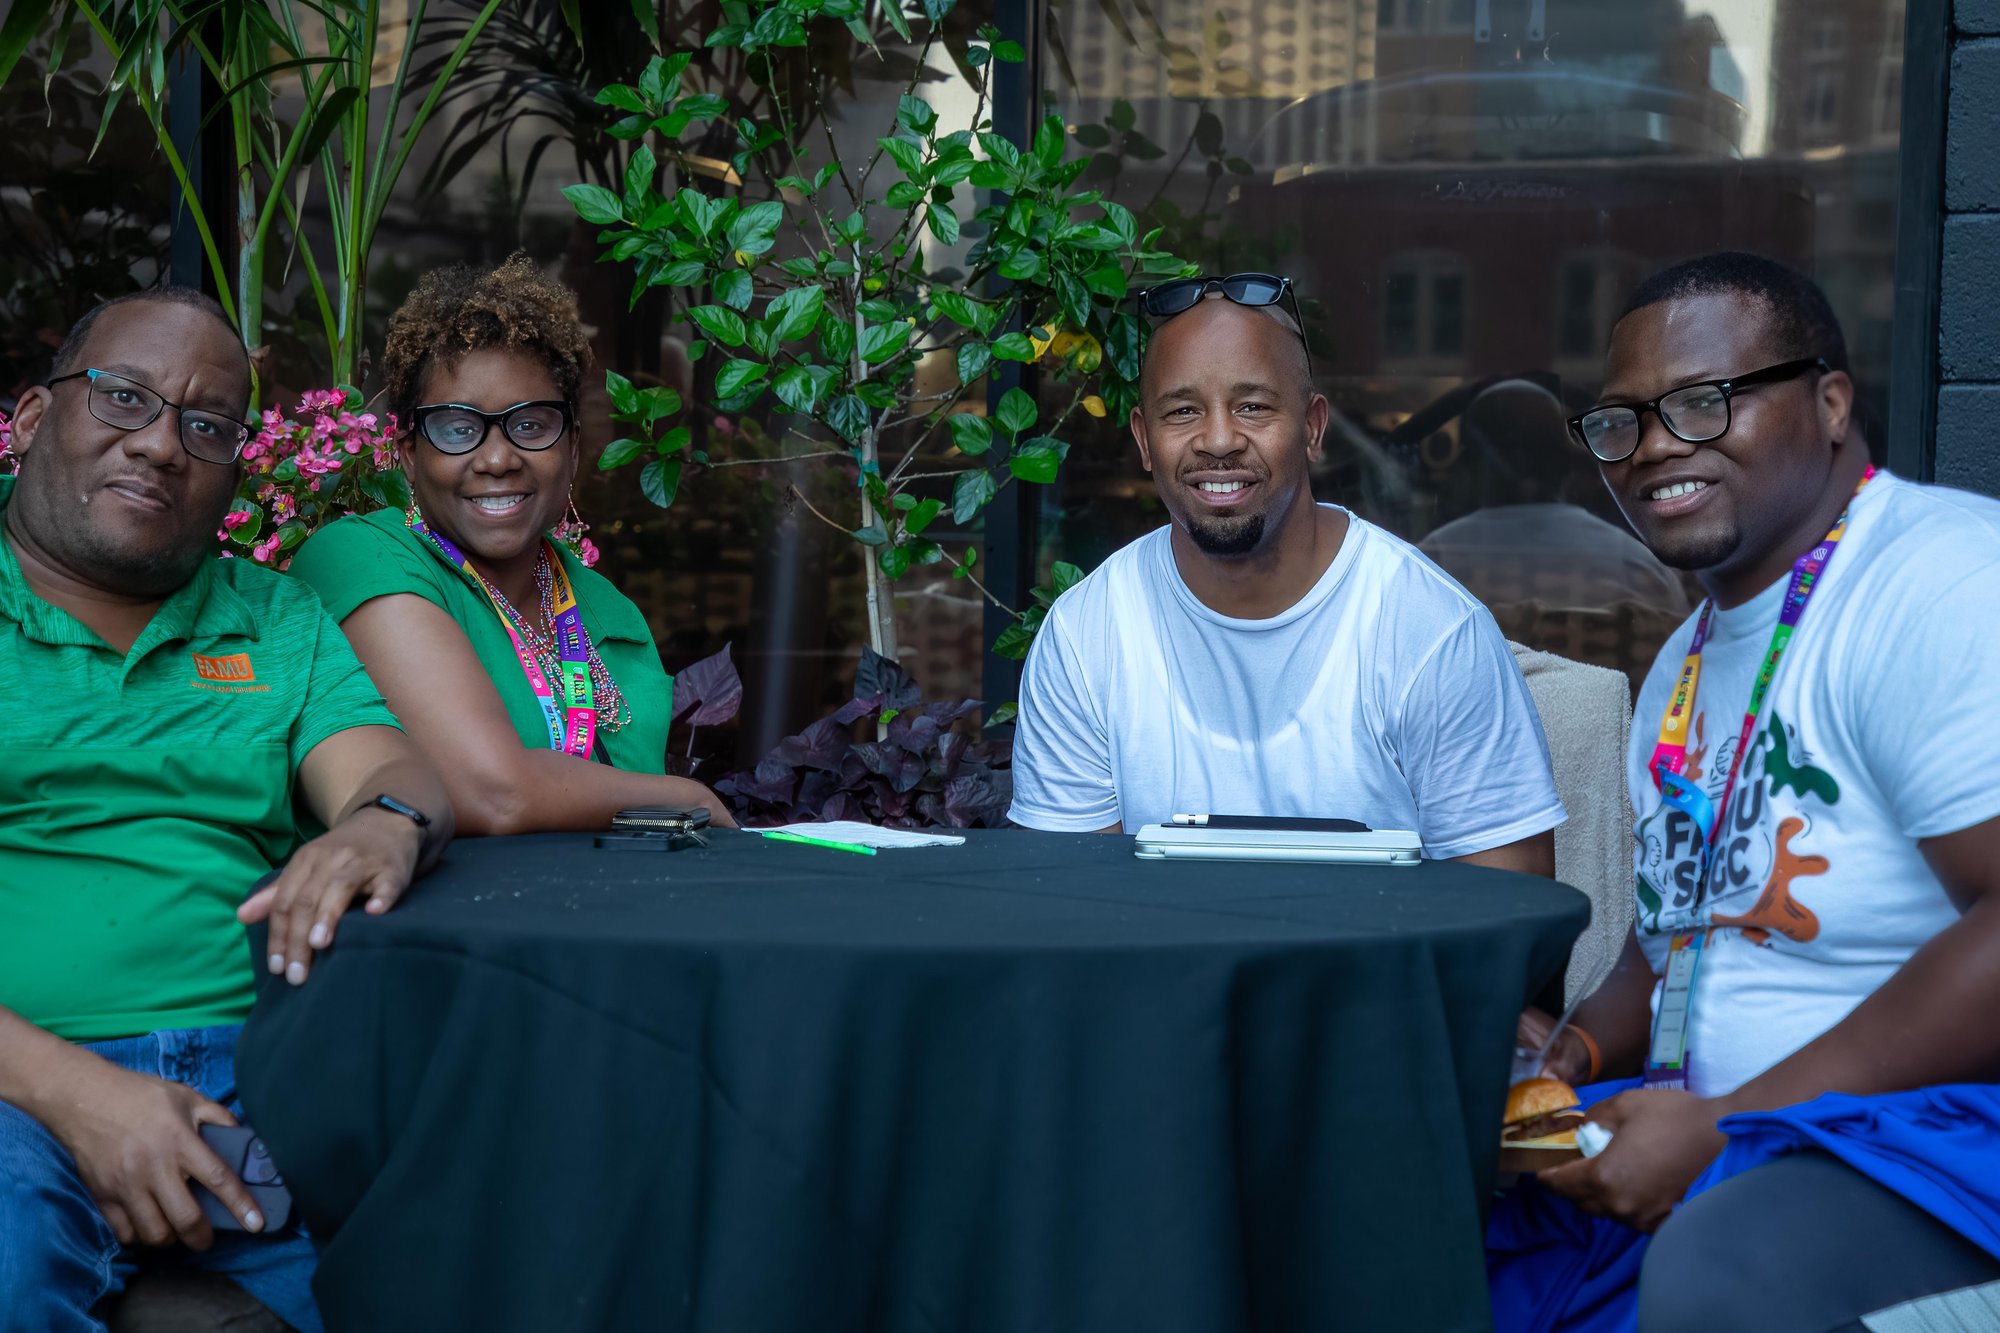 The team from FAMU enjoying the Thursday night pool deck reception. (left to right) Lewis Johnson, Jennifer Collins, Dominque Bailey, and Joshua Lowder